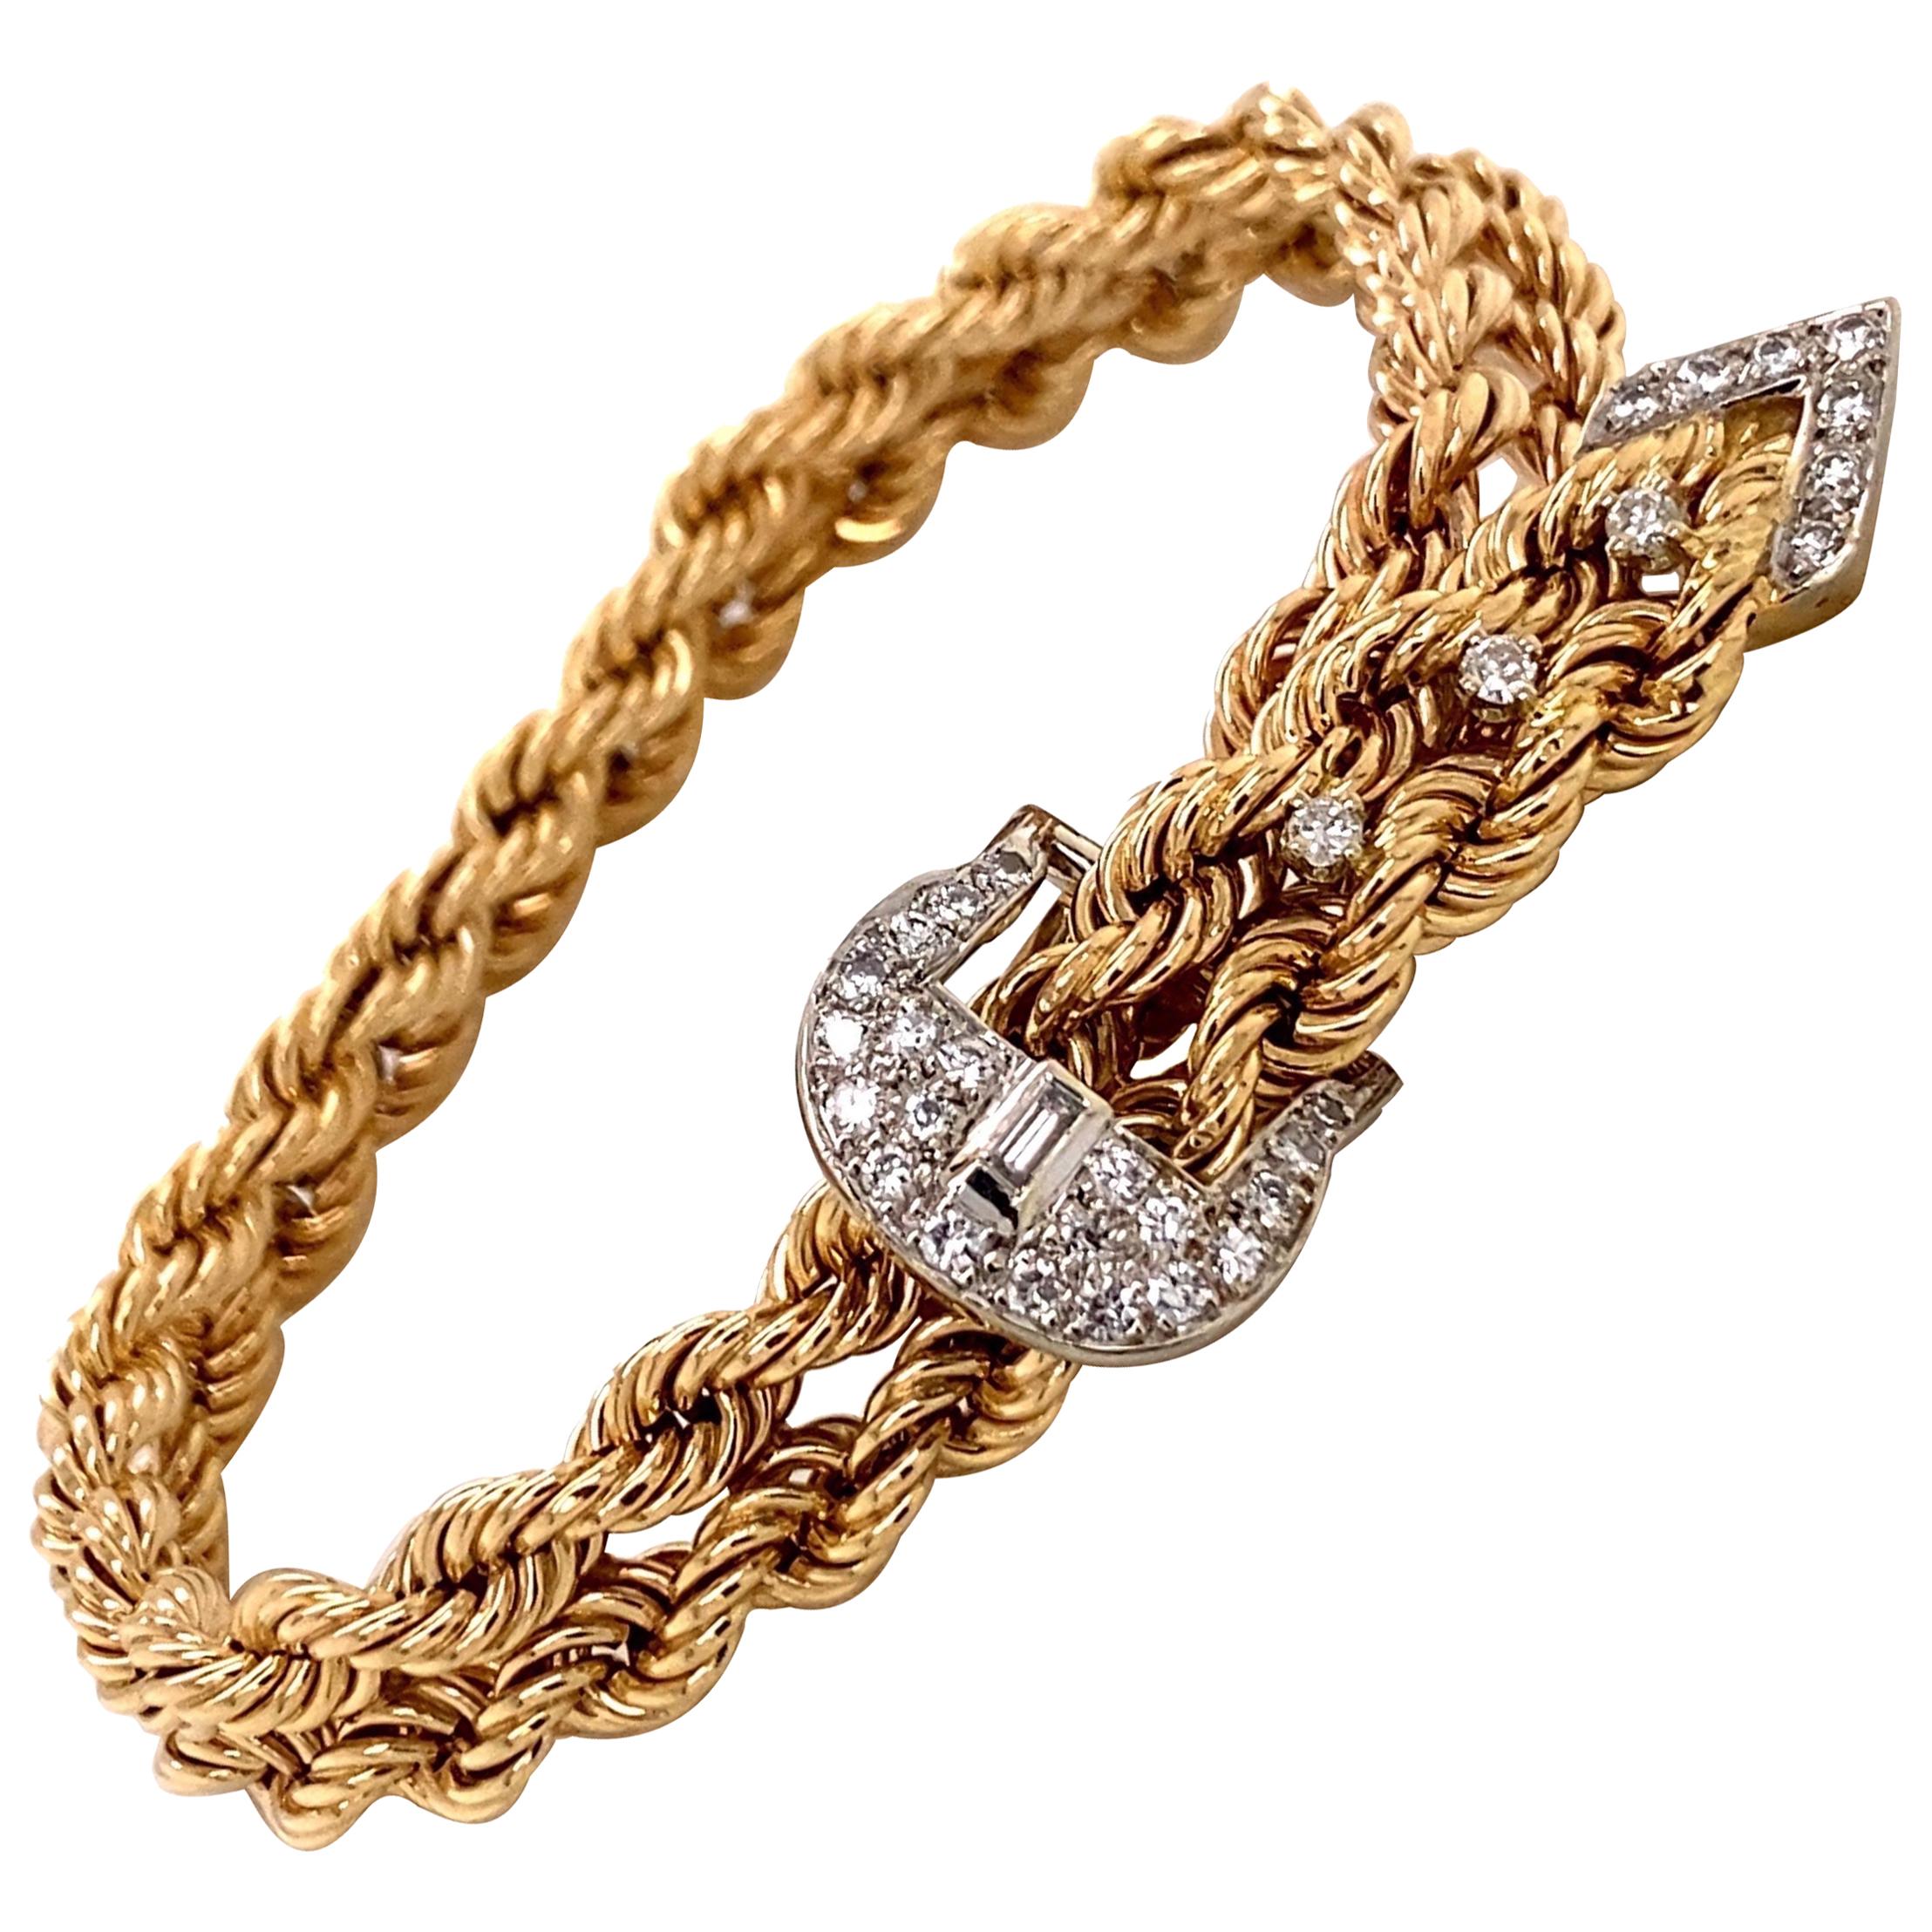 Vintage 1970s 14KY Gold Rope Bracelet with Adjustable Diamond Buckle Clasp